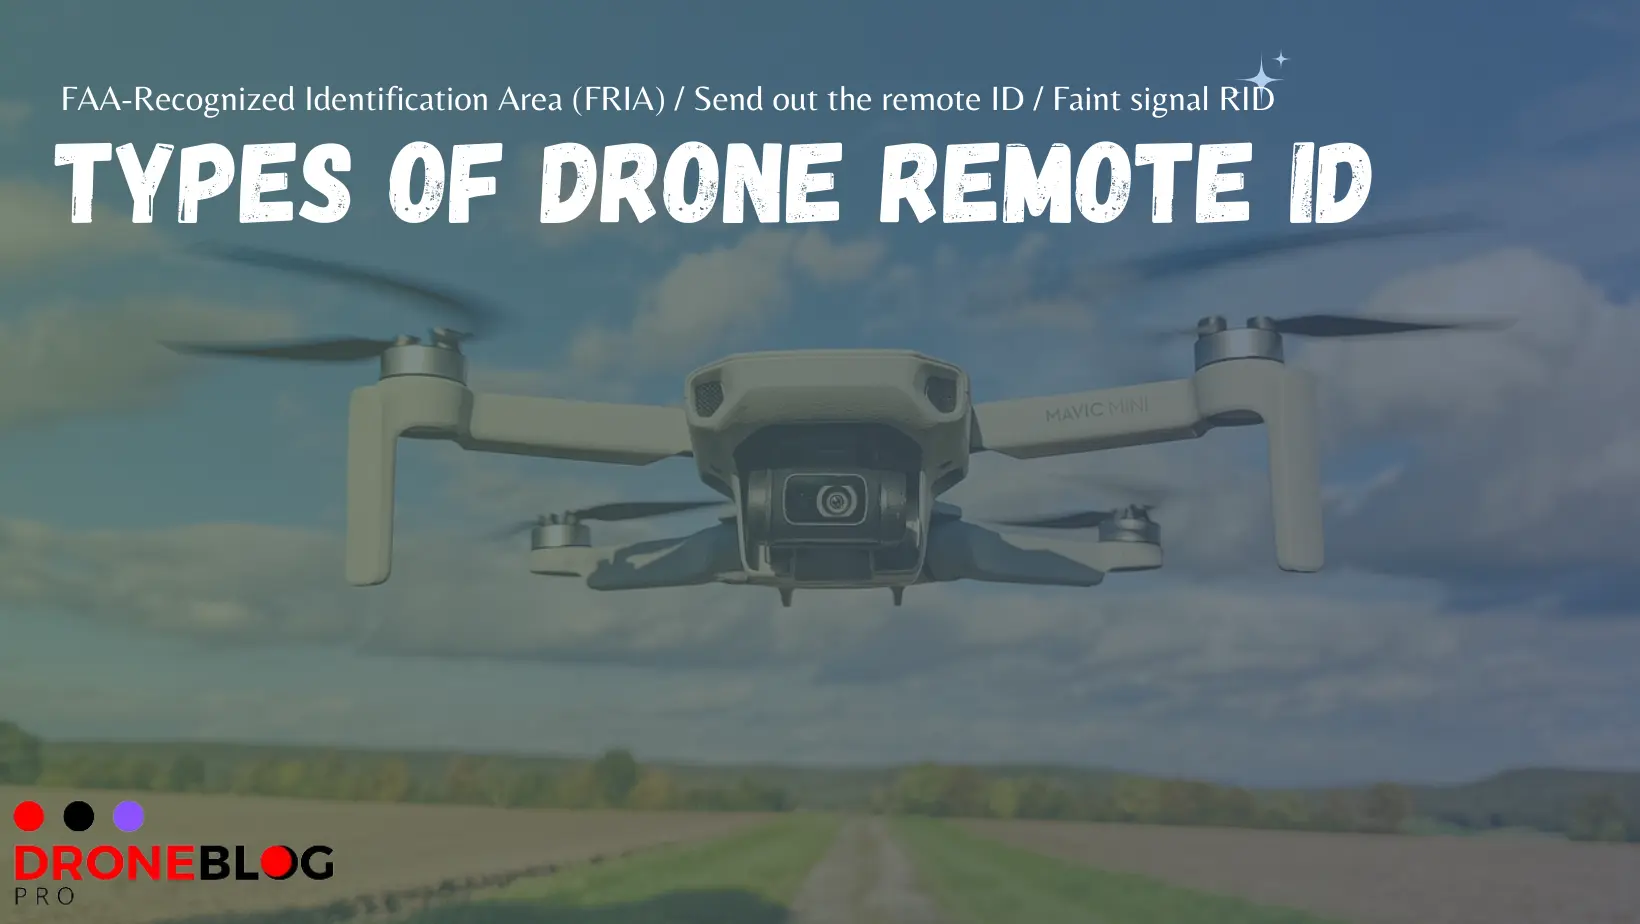 How To Add Remote ID To Drone 